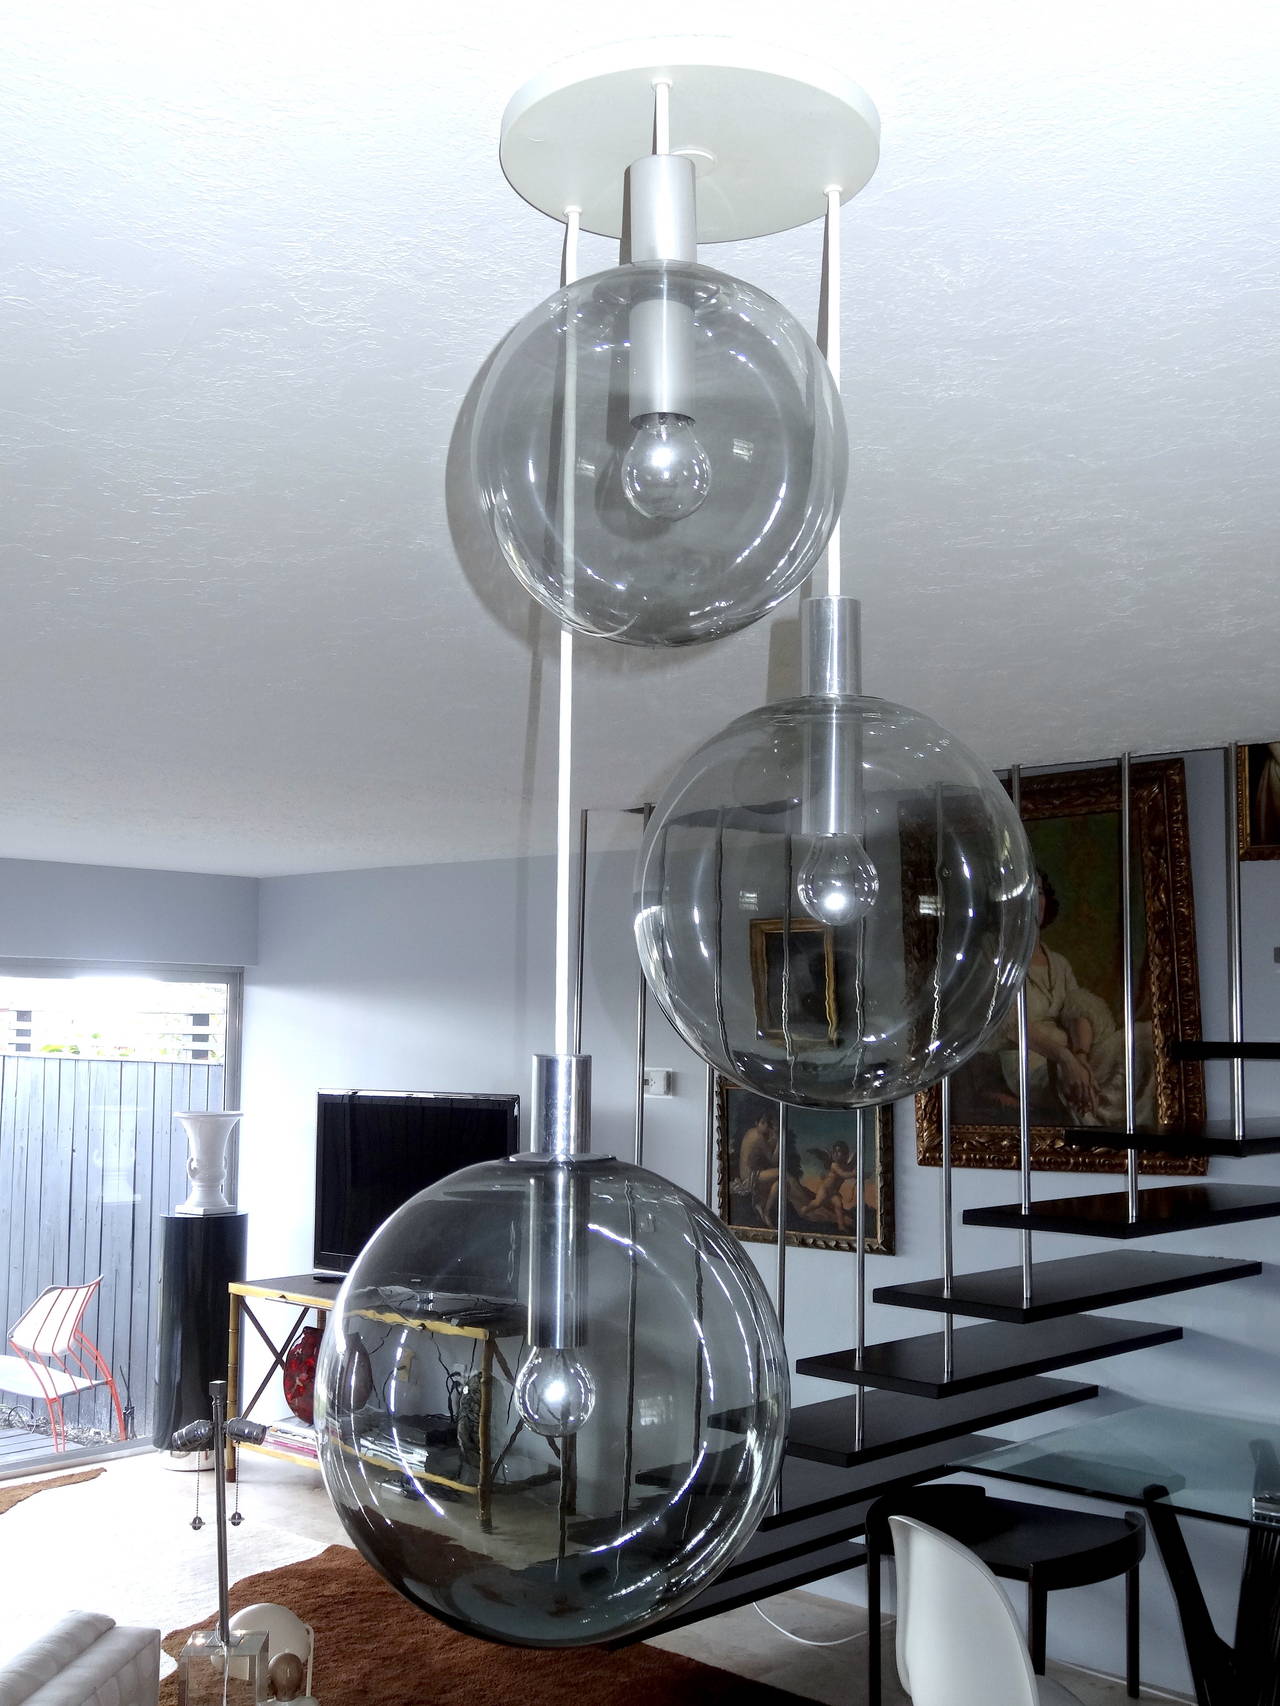 A simple modern designed three blown glass ball chandelier. This chandelier is of the period in design and complimented by the smoked color glass. Modern with a bit of elegance.
Possibly Italian.